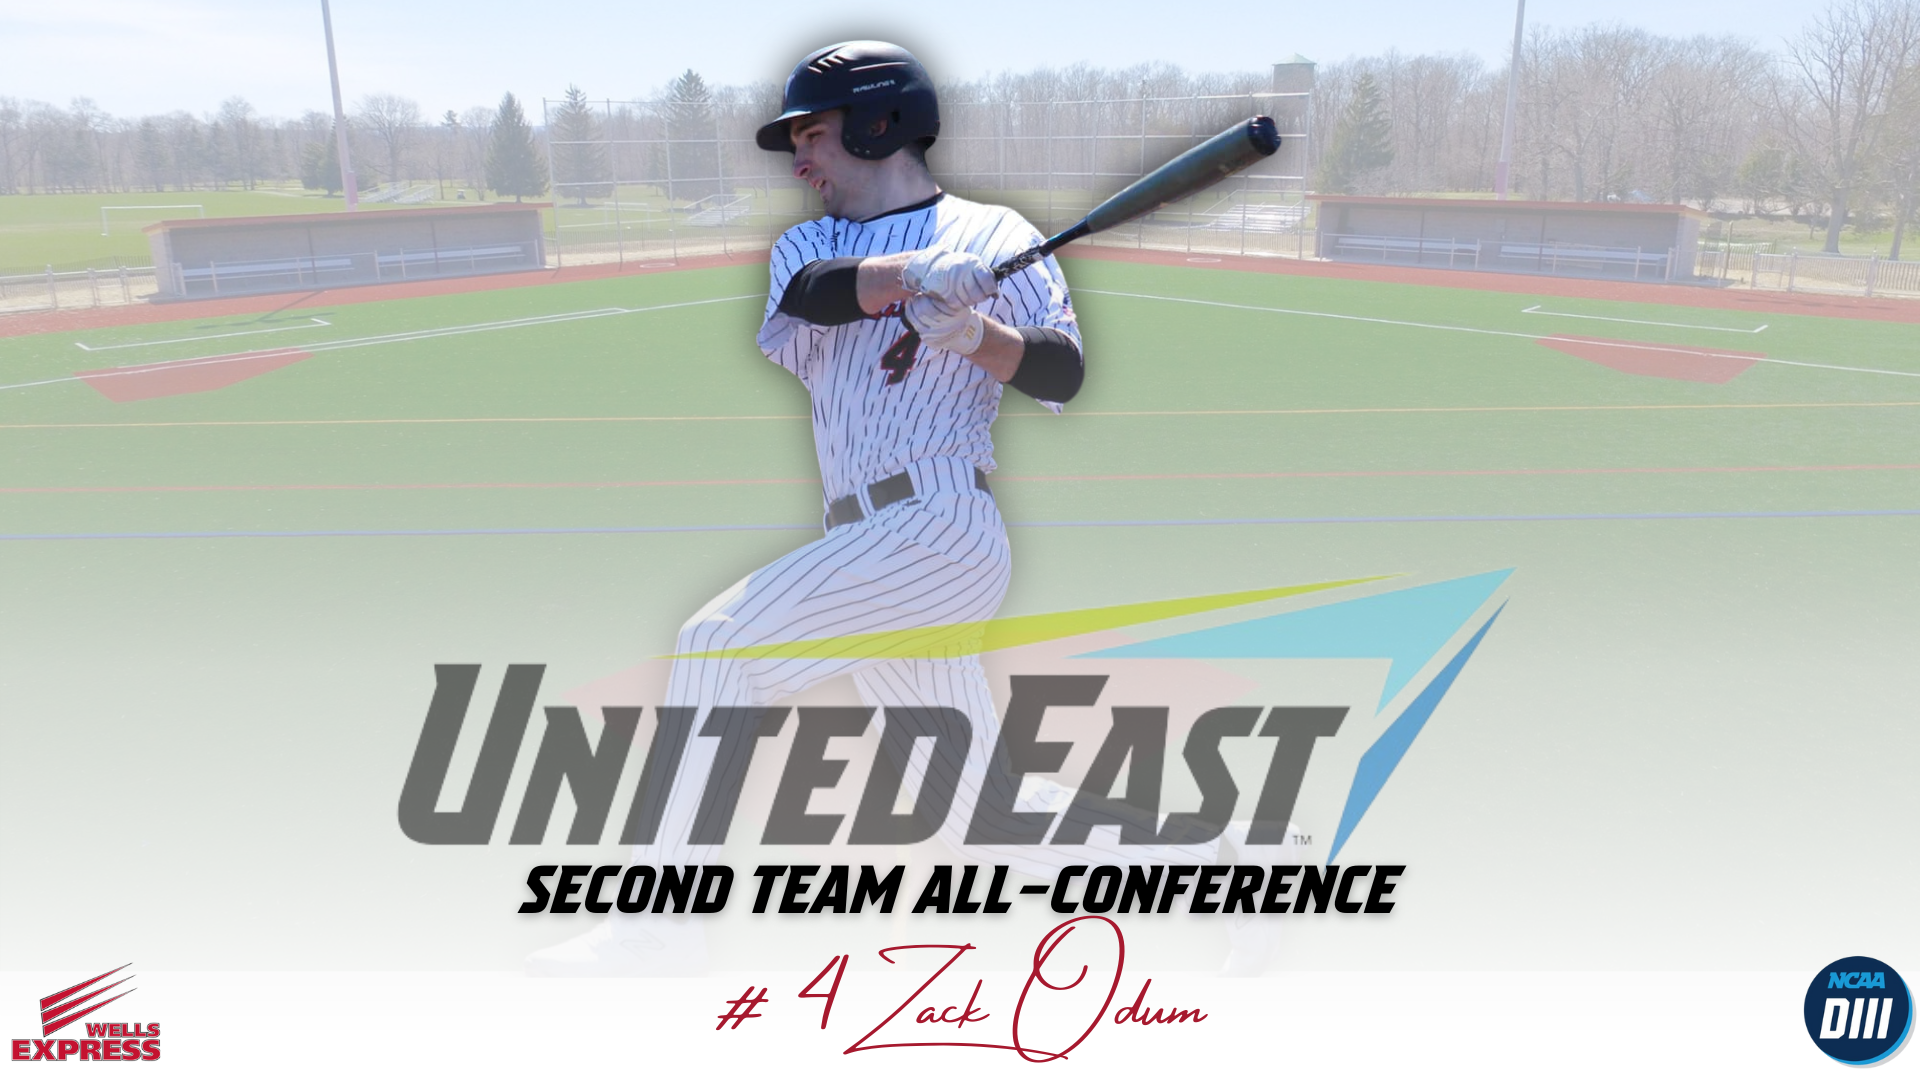 Zack Odum second team all conference 